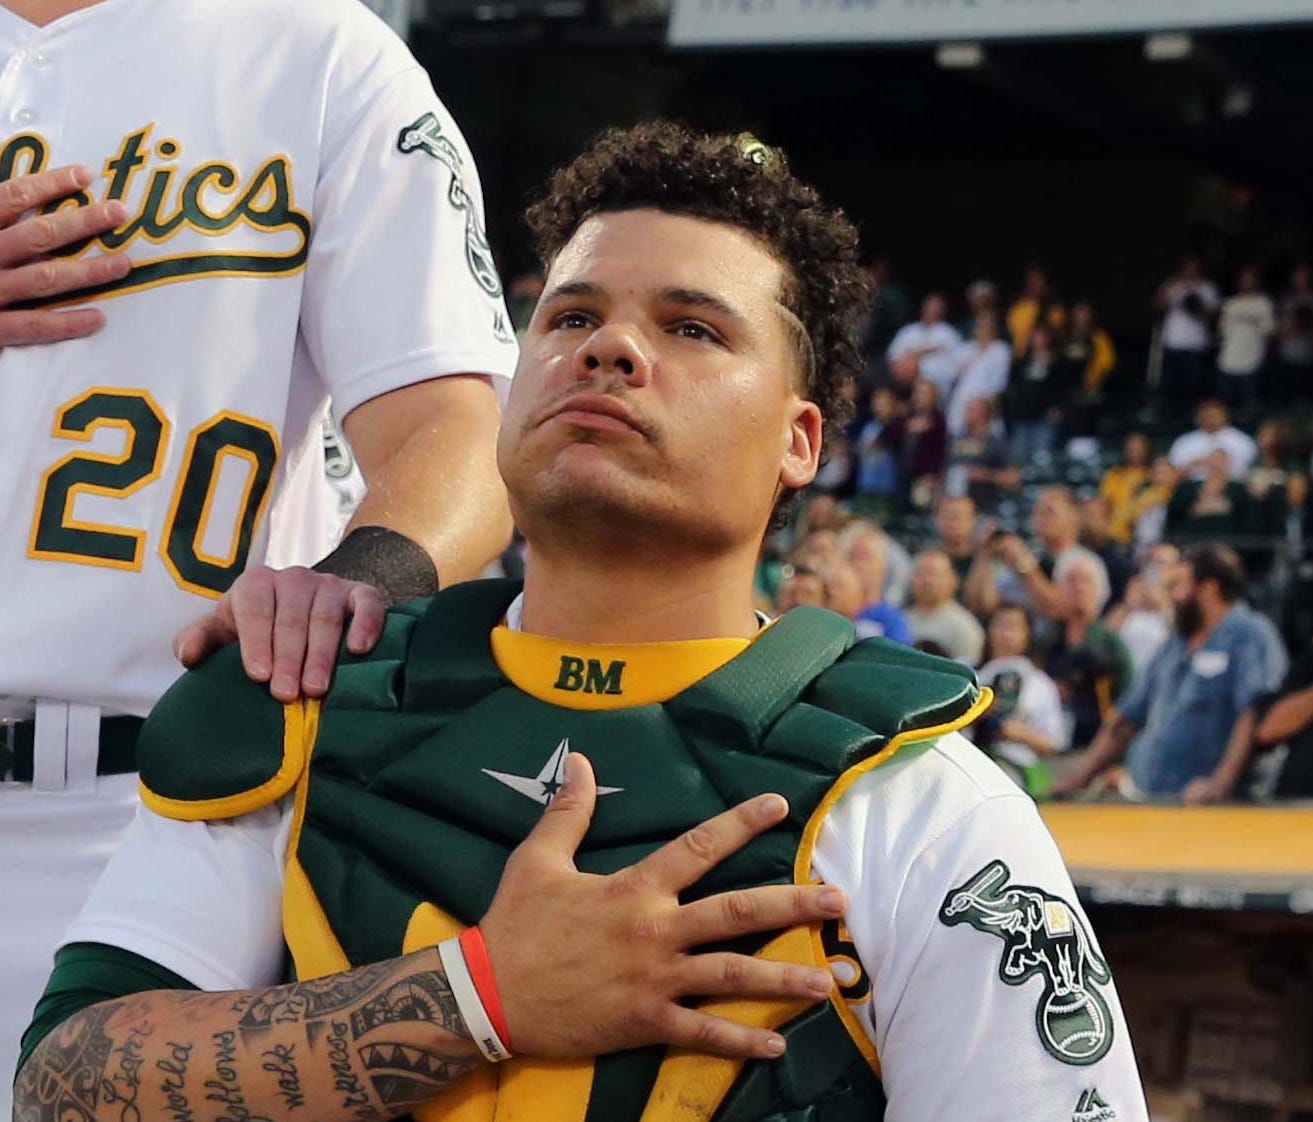 Athletics catcher Bruce Maxwell takes a knee during the national anthem before a game against Seattle on Sept. 25.